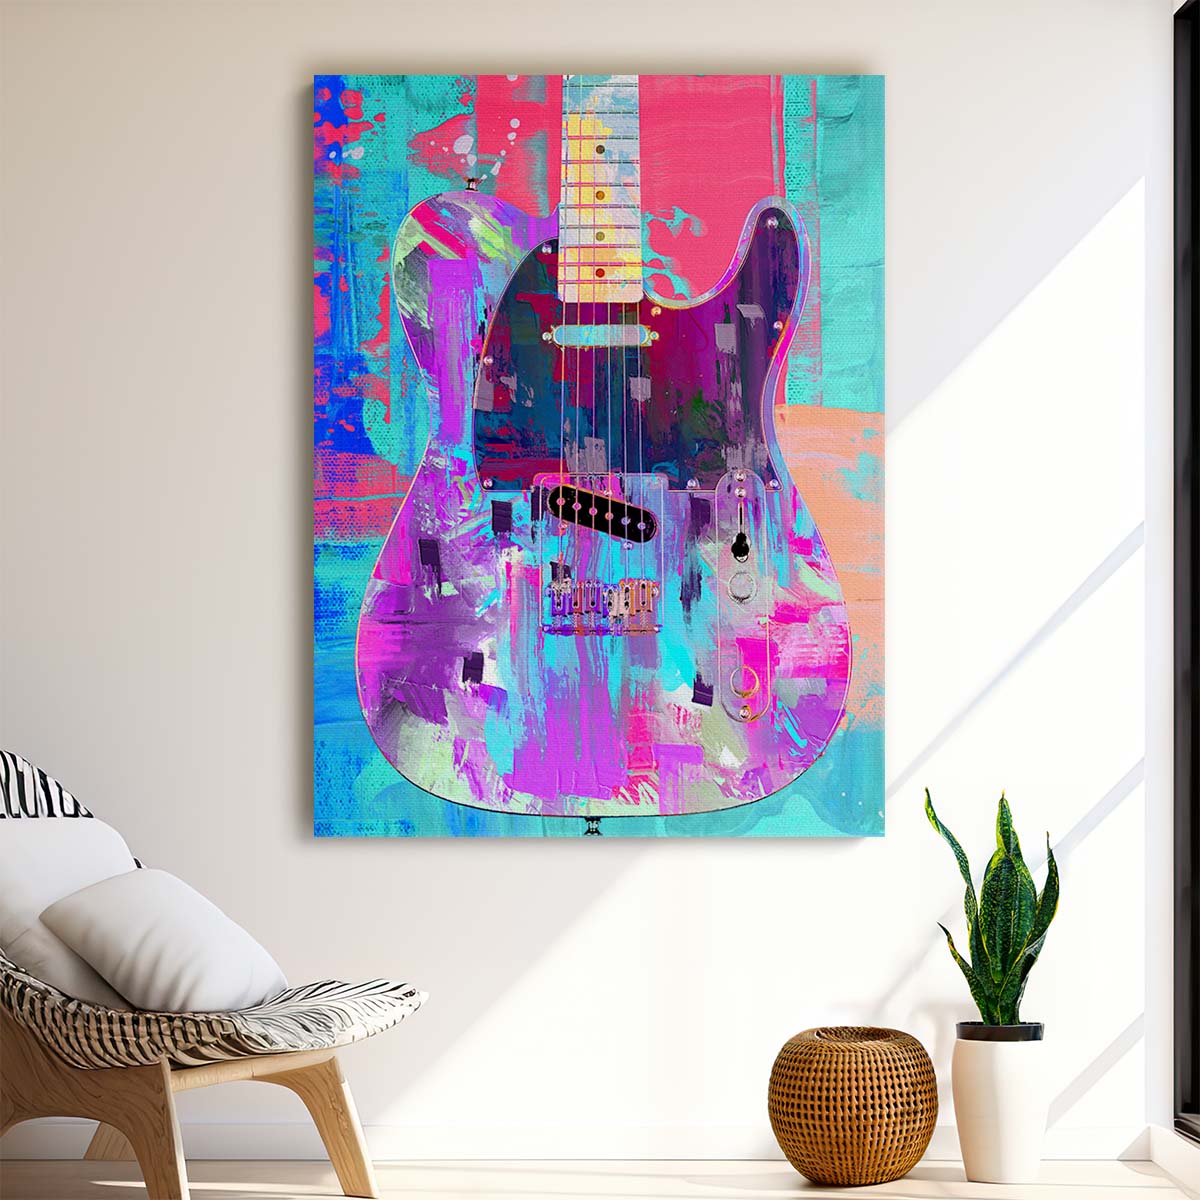 Painted Telecaster Guitar Wall Art by Luxuriance Designs. Made in USA.